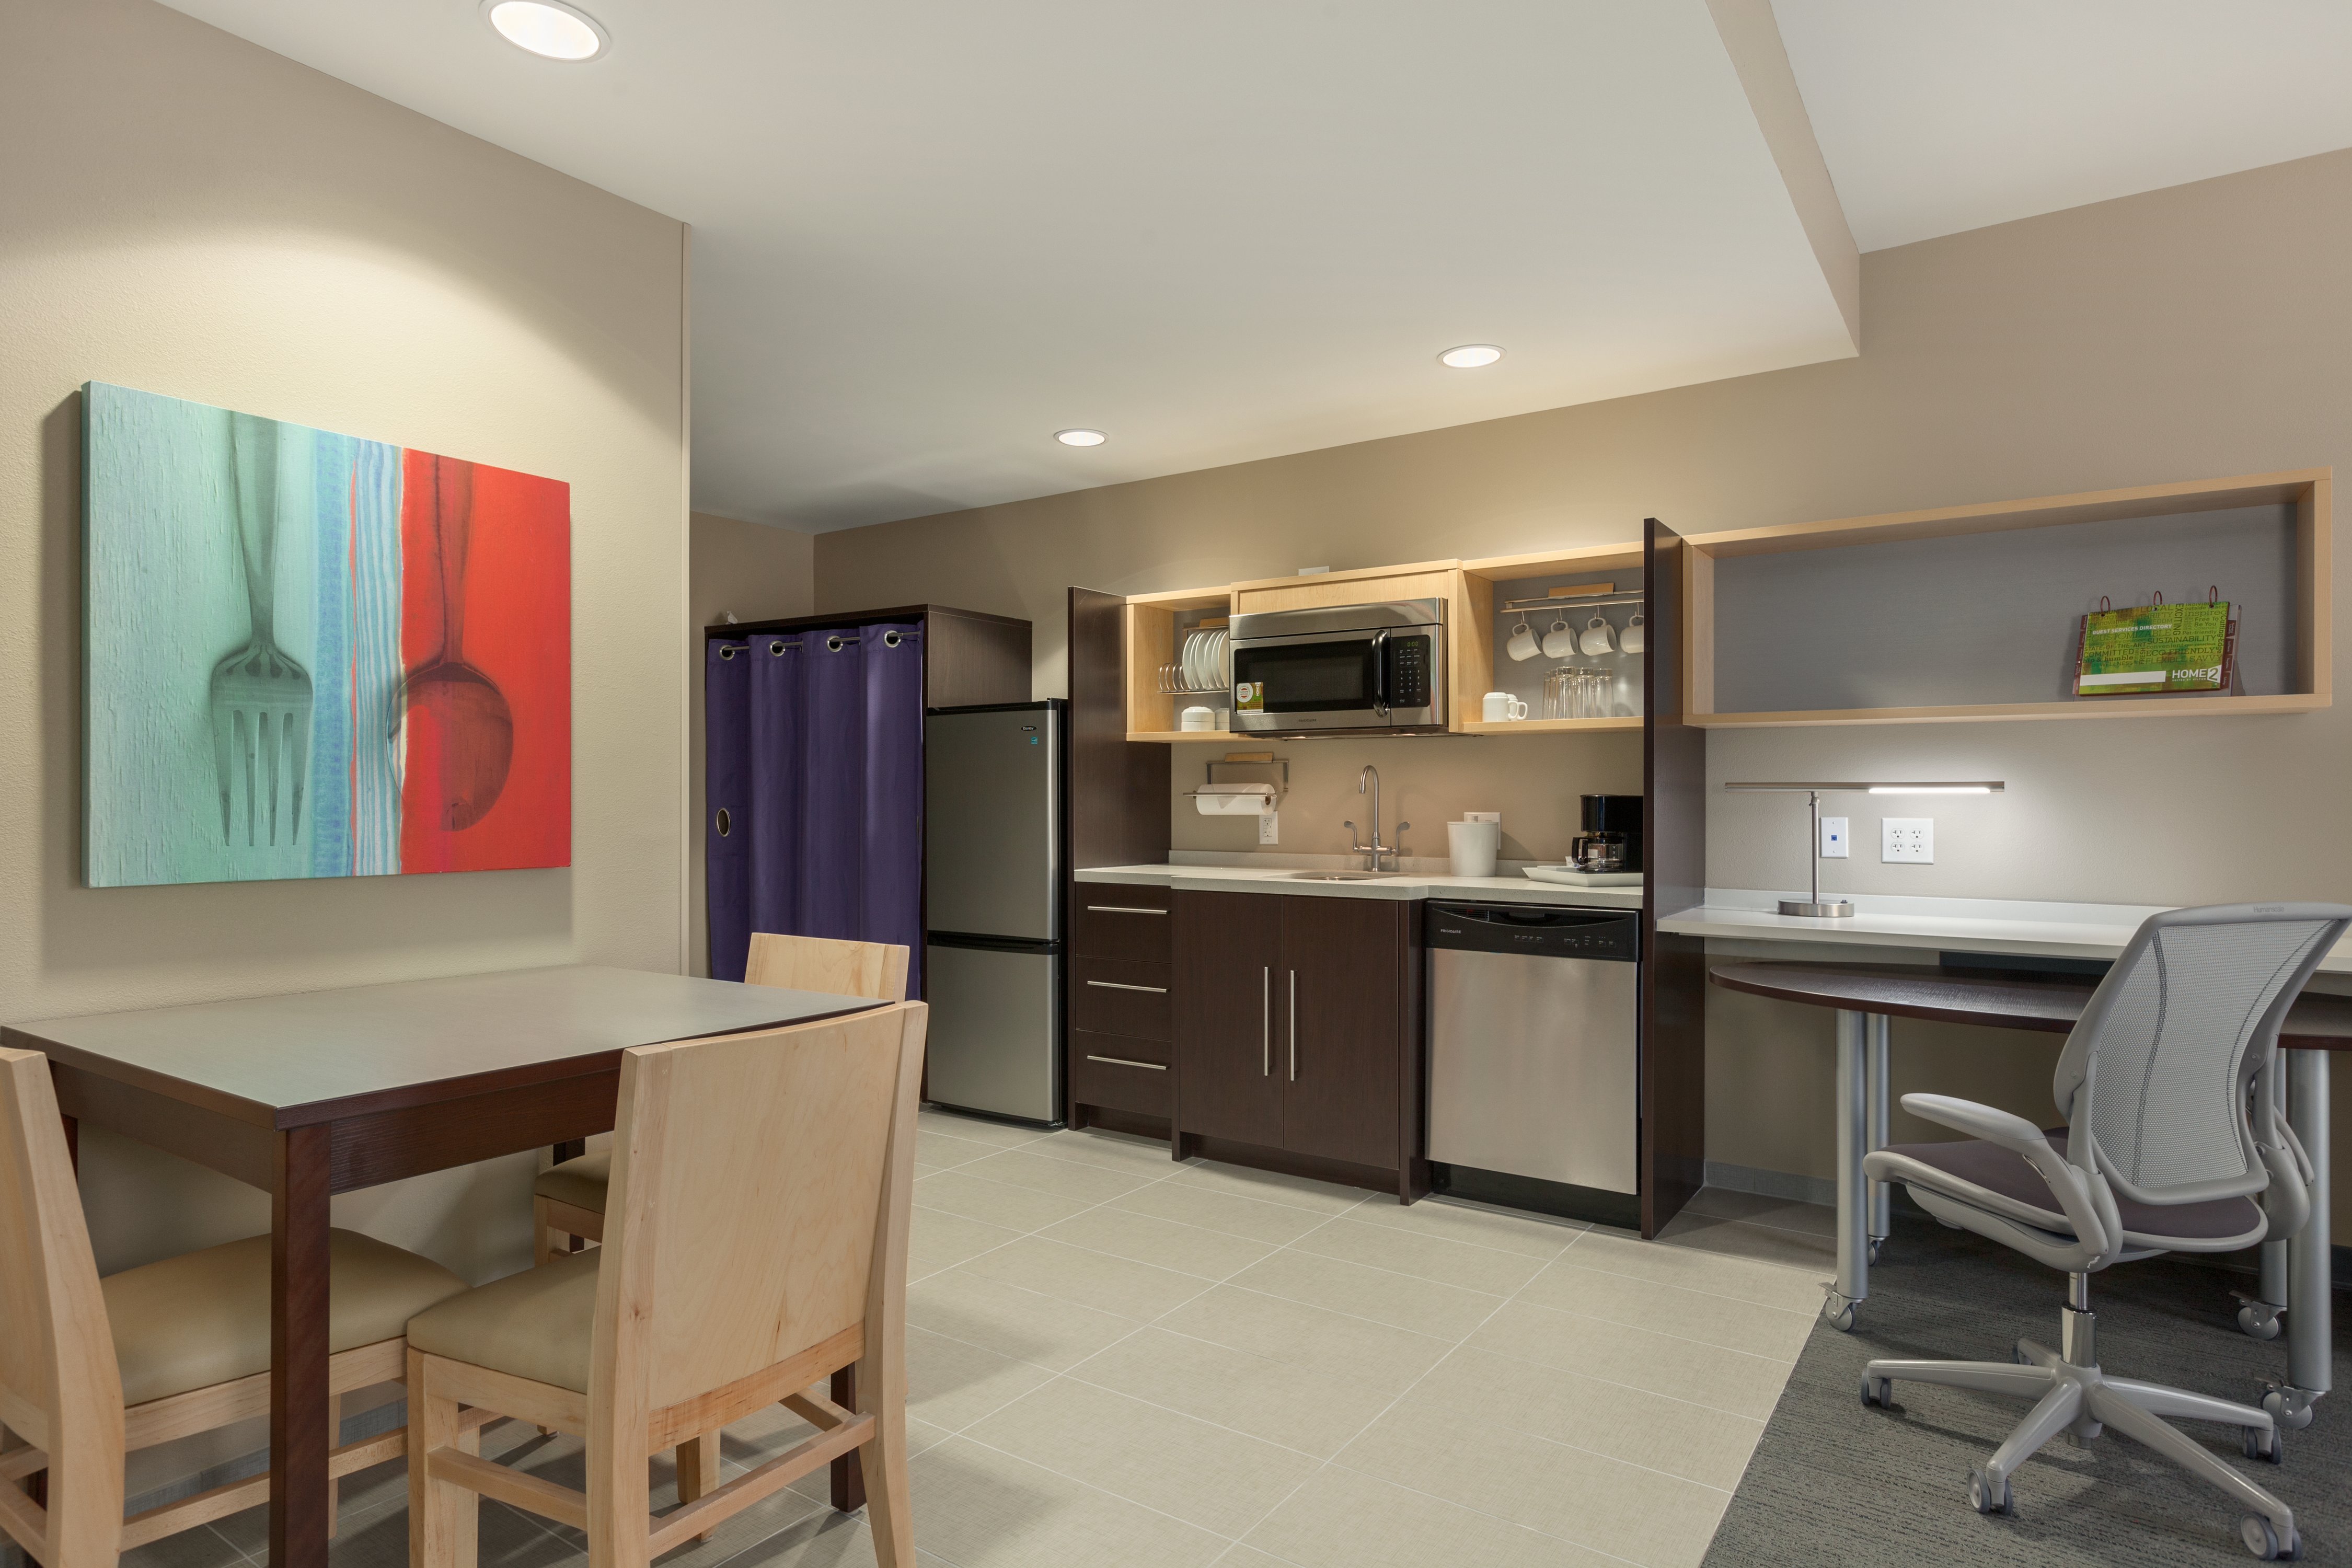 1 King 1 Bed Suite Kitchen